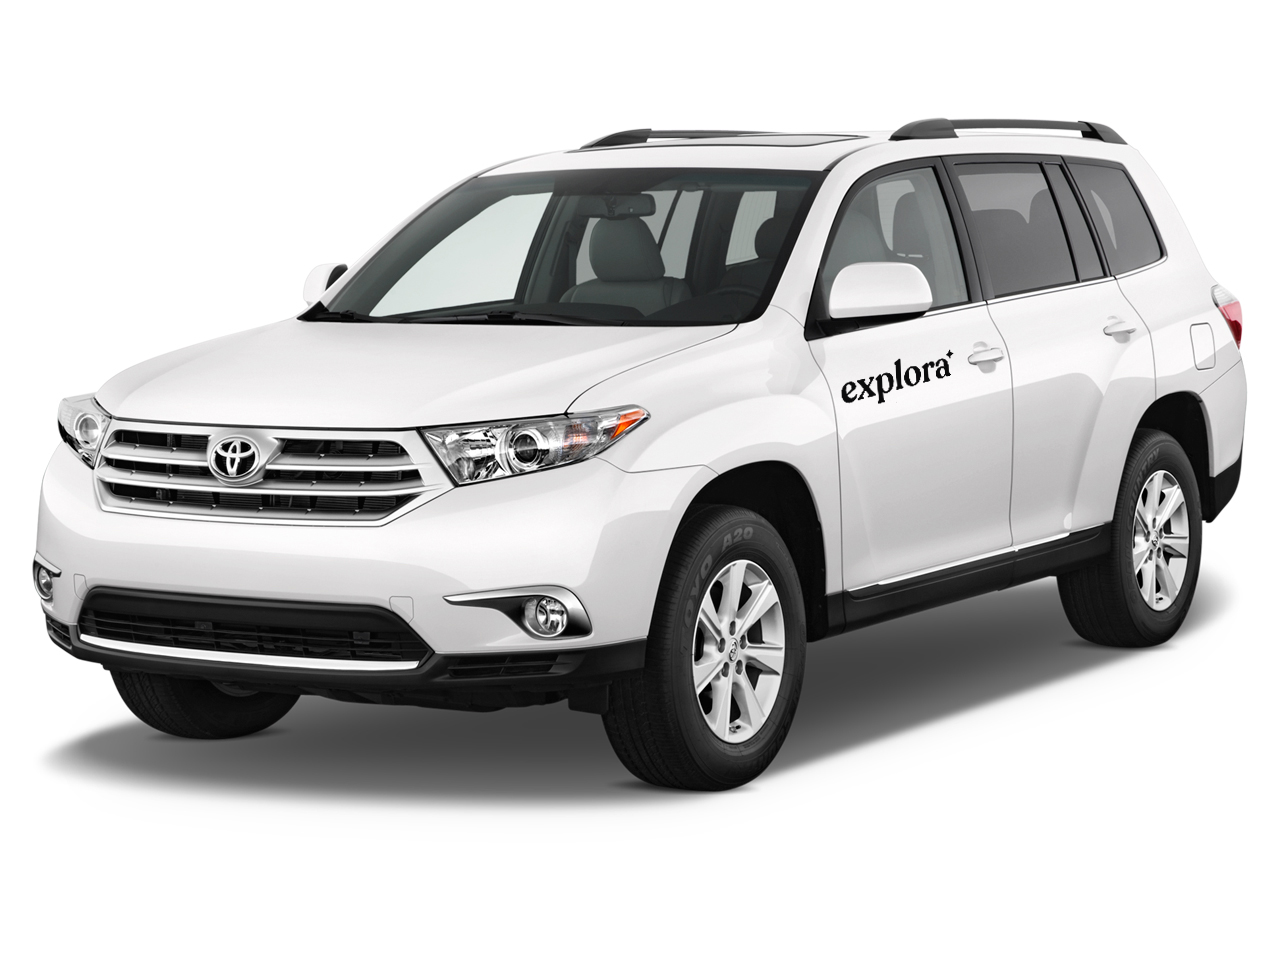 Rent a Toyota Kluger 2012 Car with Camping Gear in Tasmania